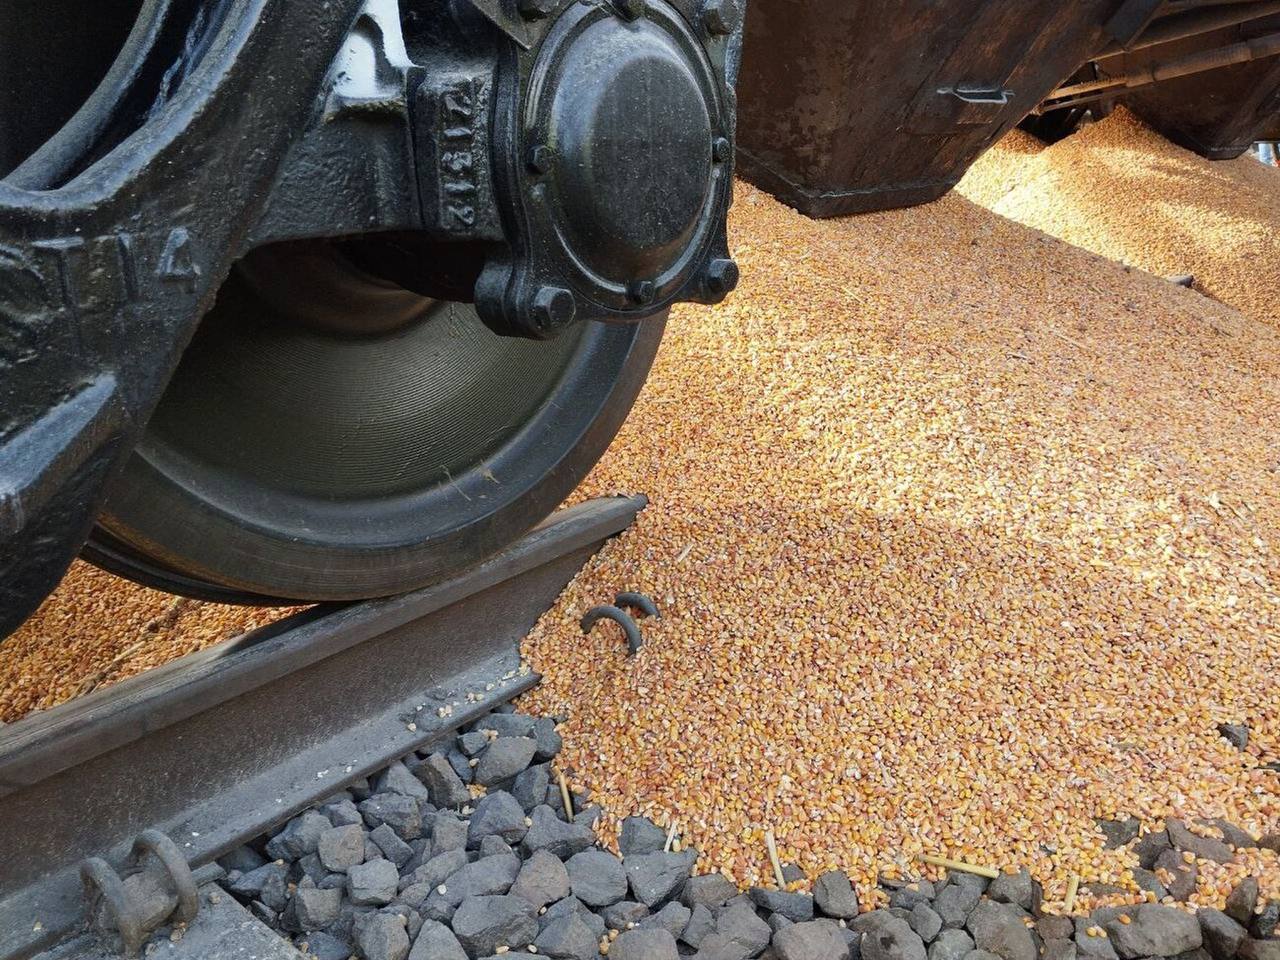 Infrastructure Ministry: Grain dumped by Polish farmers was transiting to Germany